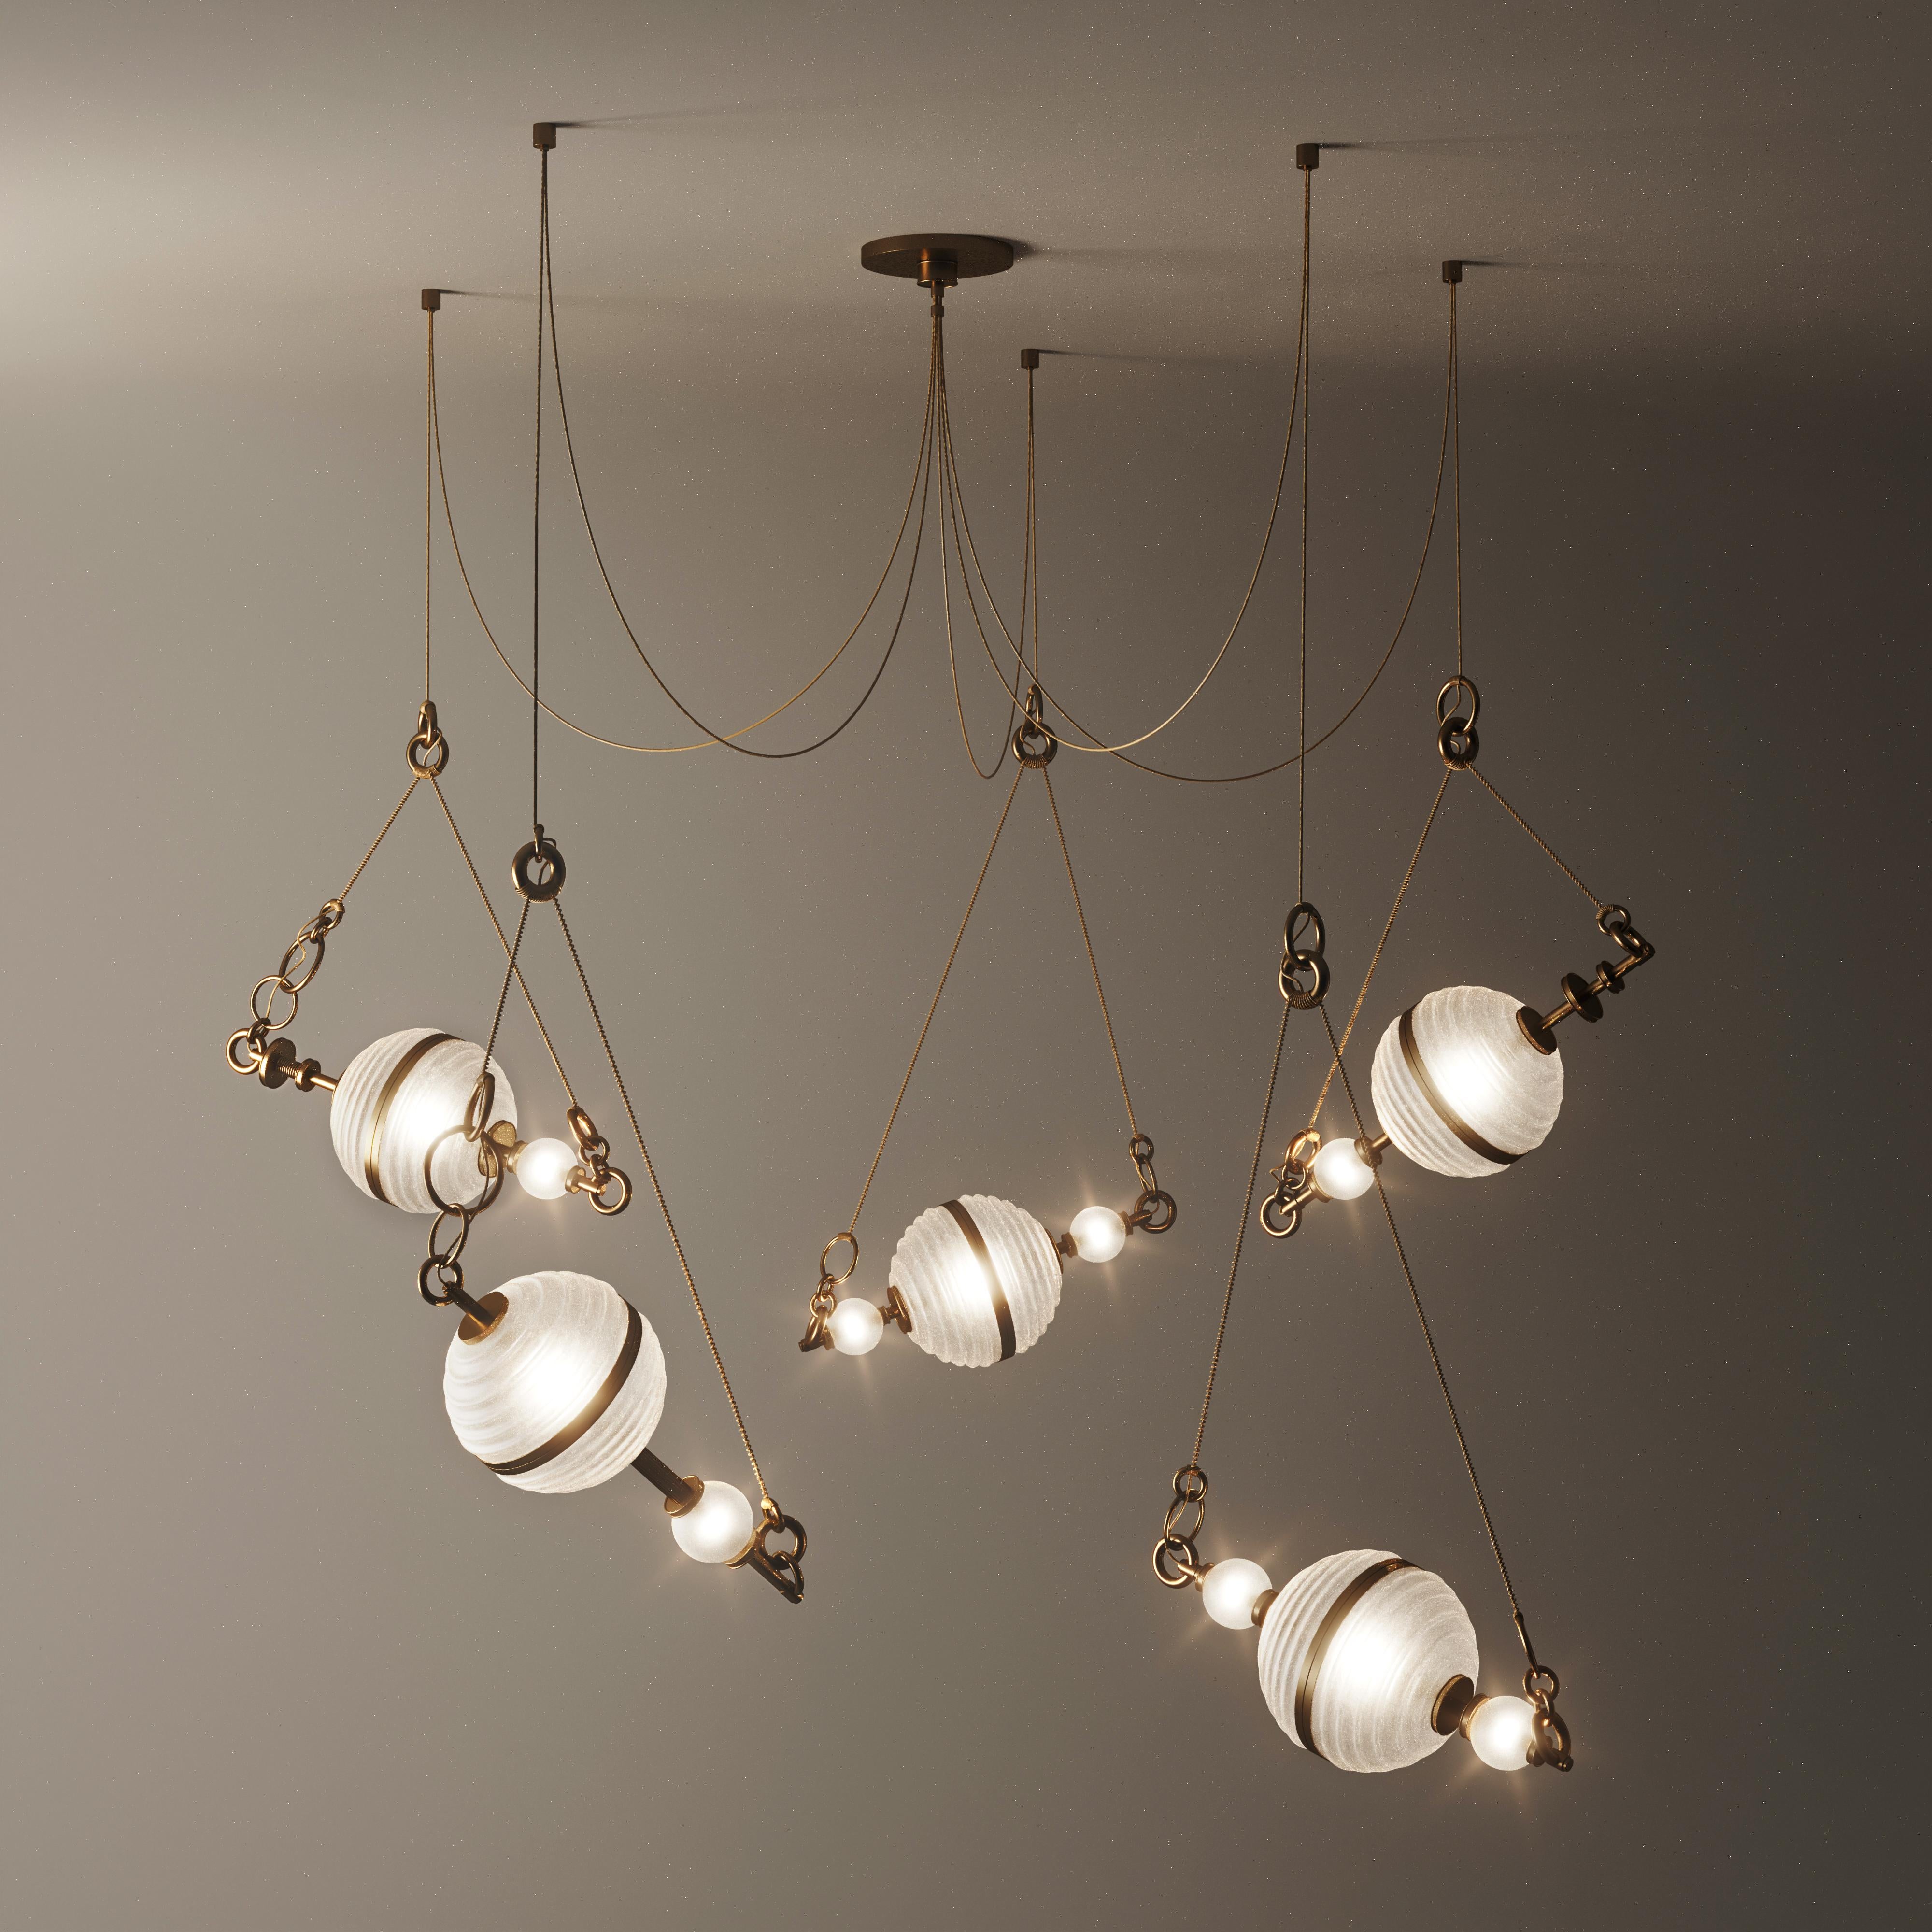 The sixth planet from the sun and the second-largest in the Solar System, Saturn was the inspiration behind this aesthetic suspension lamp design. 
Composed of five white frosted glass lampshades embellished with brushed brass around its shape that